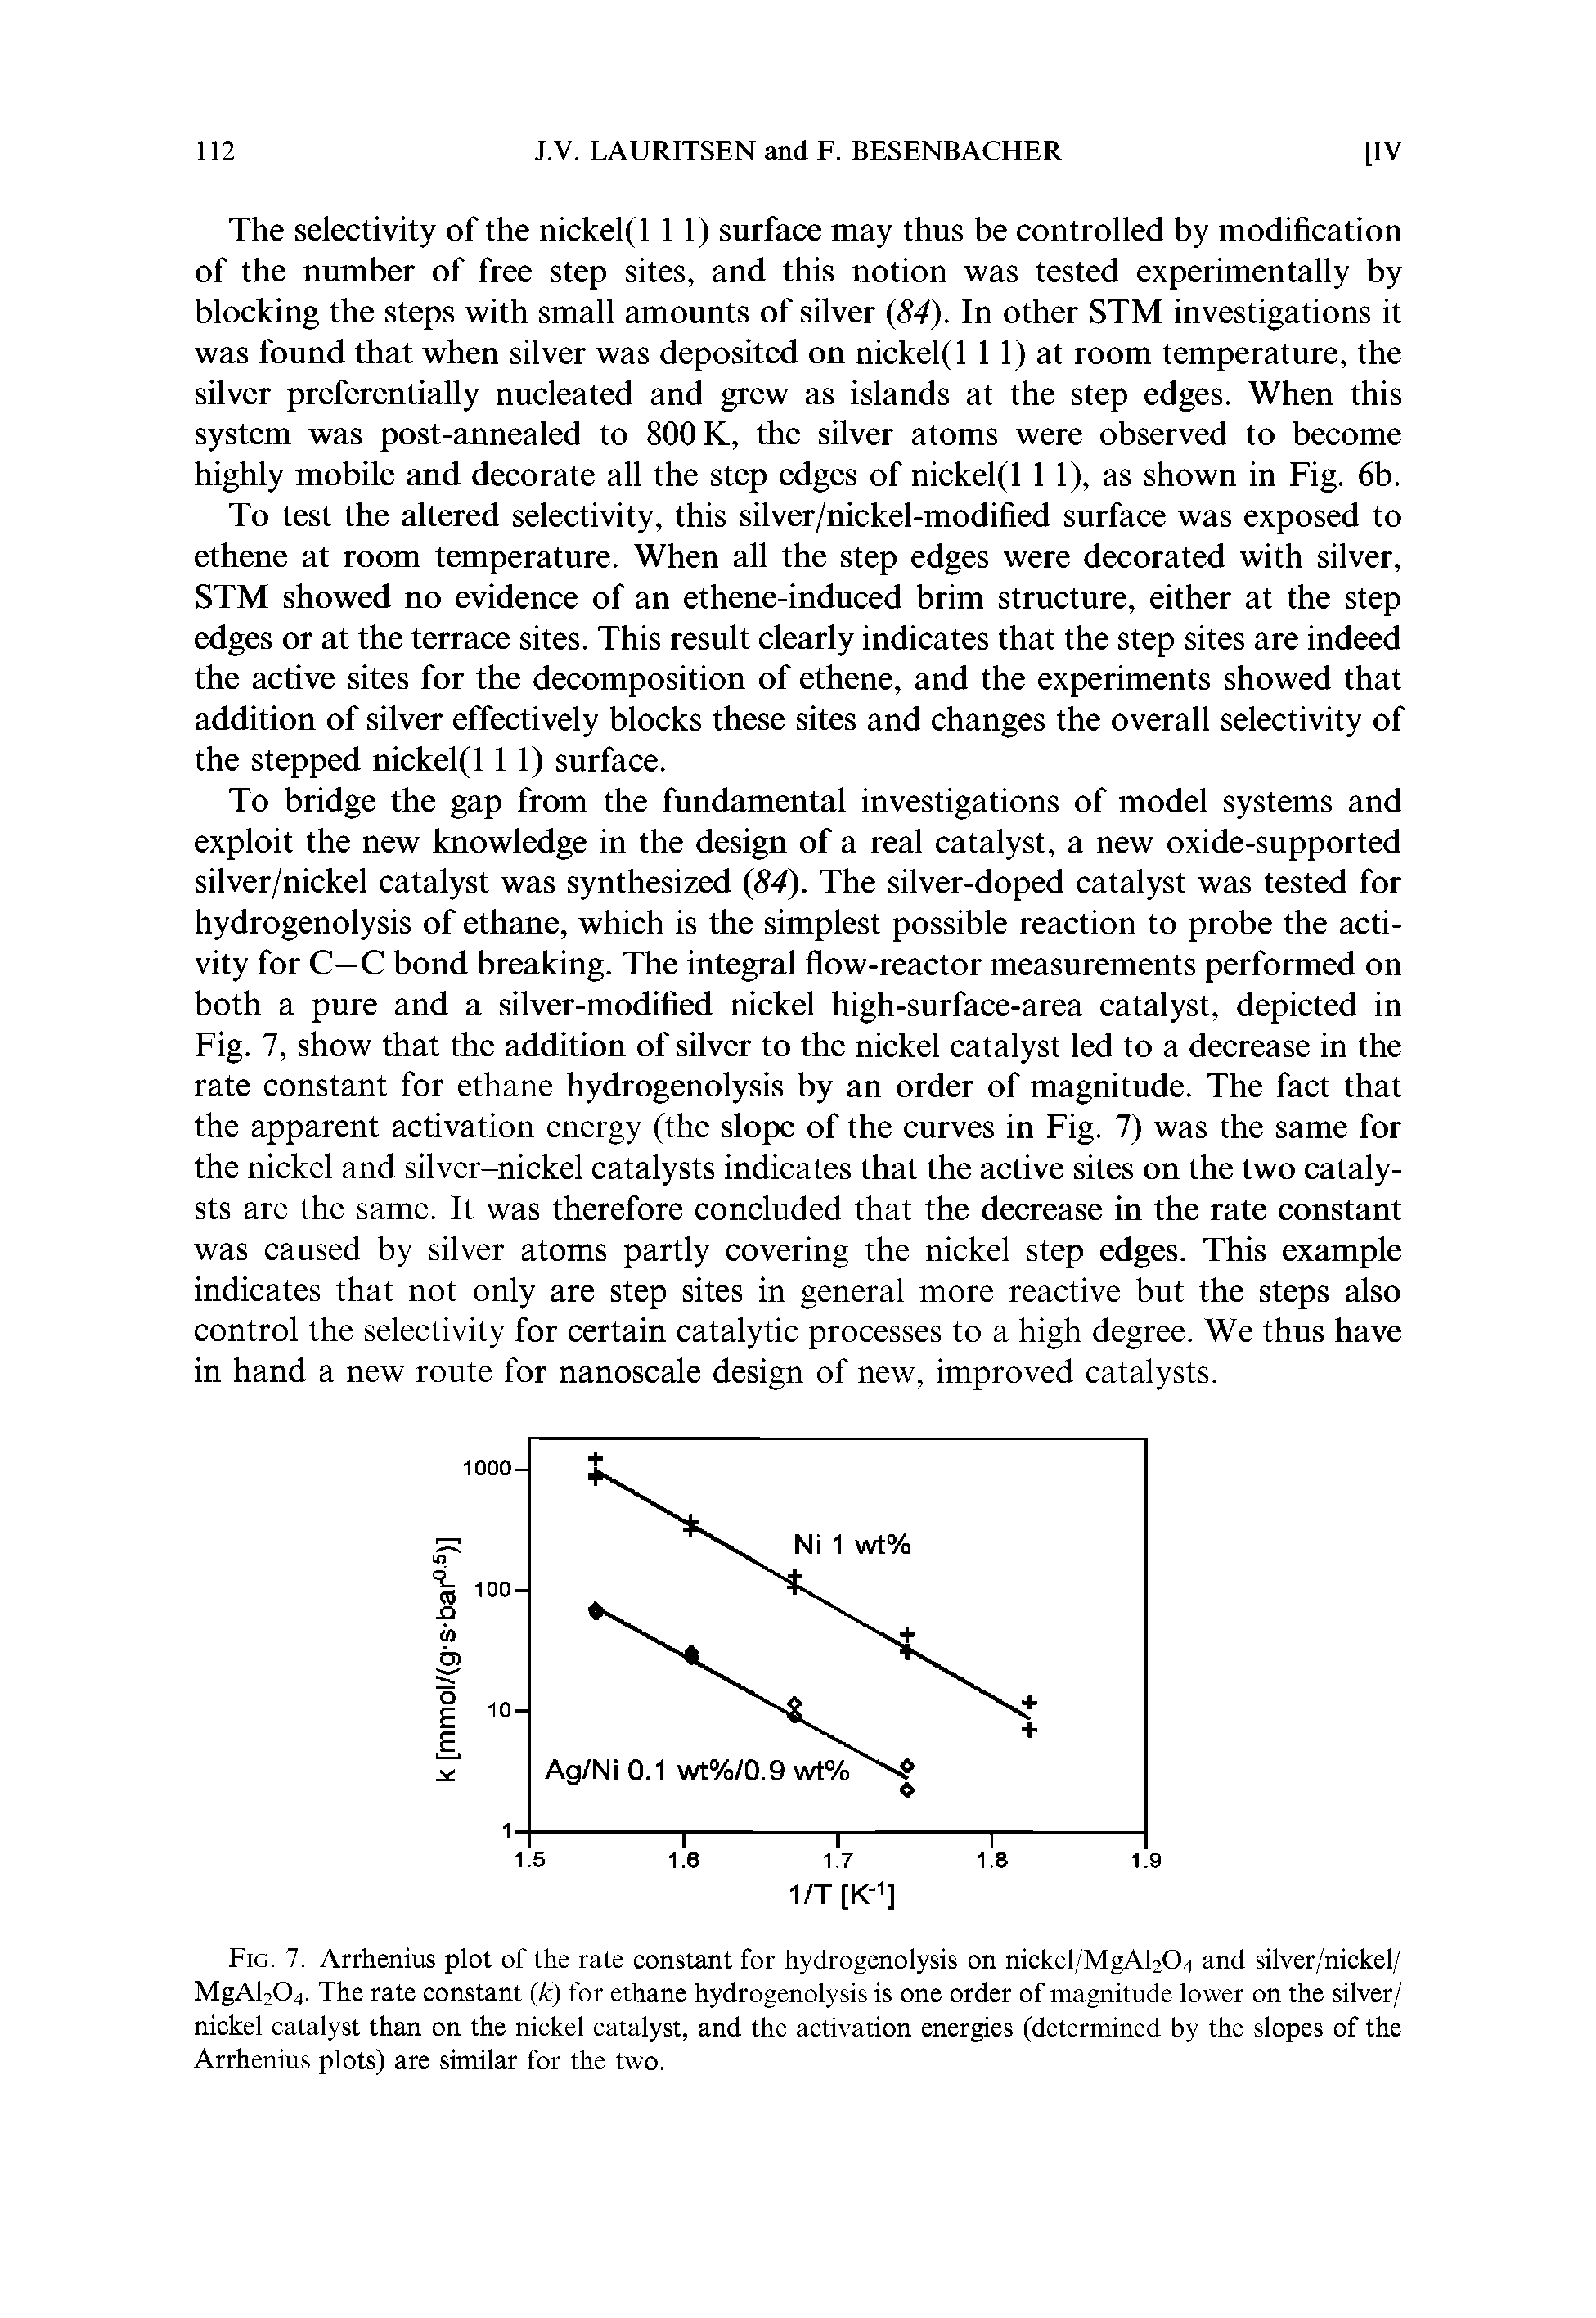 Fig. 7. Arrhenius plot of the rate constant for hydrogenolysis on nickel/MgAl2O4 and silver/nickel/ MgAl2O4. The rate constant (L) for ethane hydrogenolysis is one order of magnitude lower on the silver/ nickel catalyst than on the nickel catalyst, and the activation energies (determined by the slopes of the Arrhenius plots) are similar for the two.